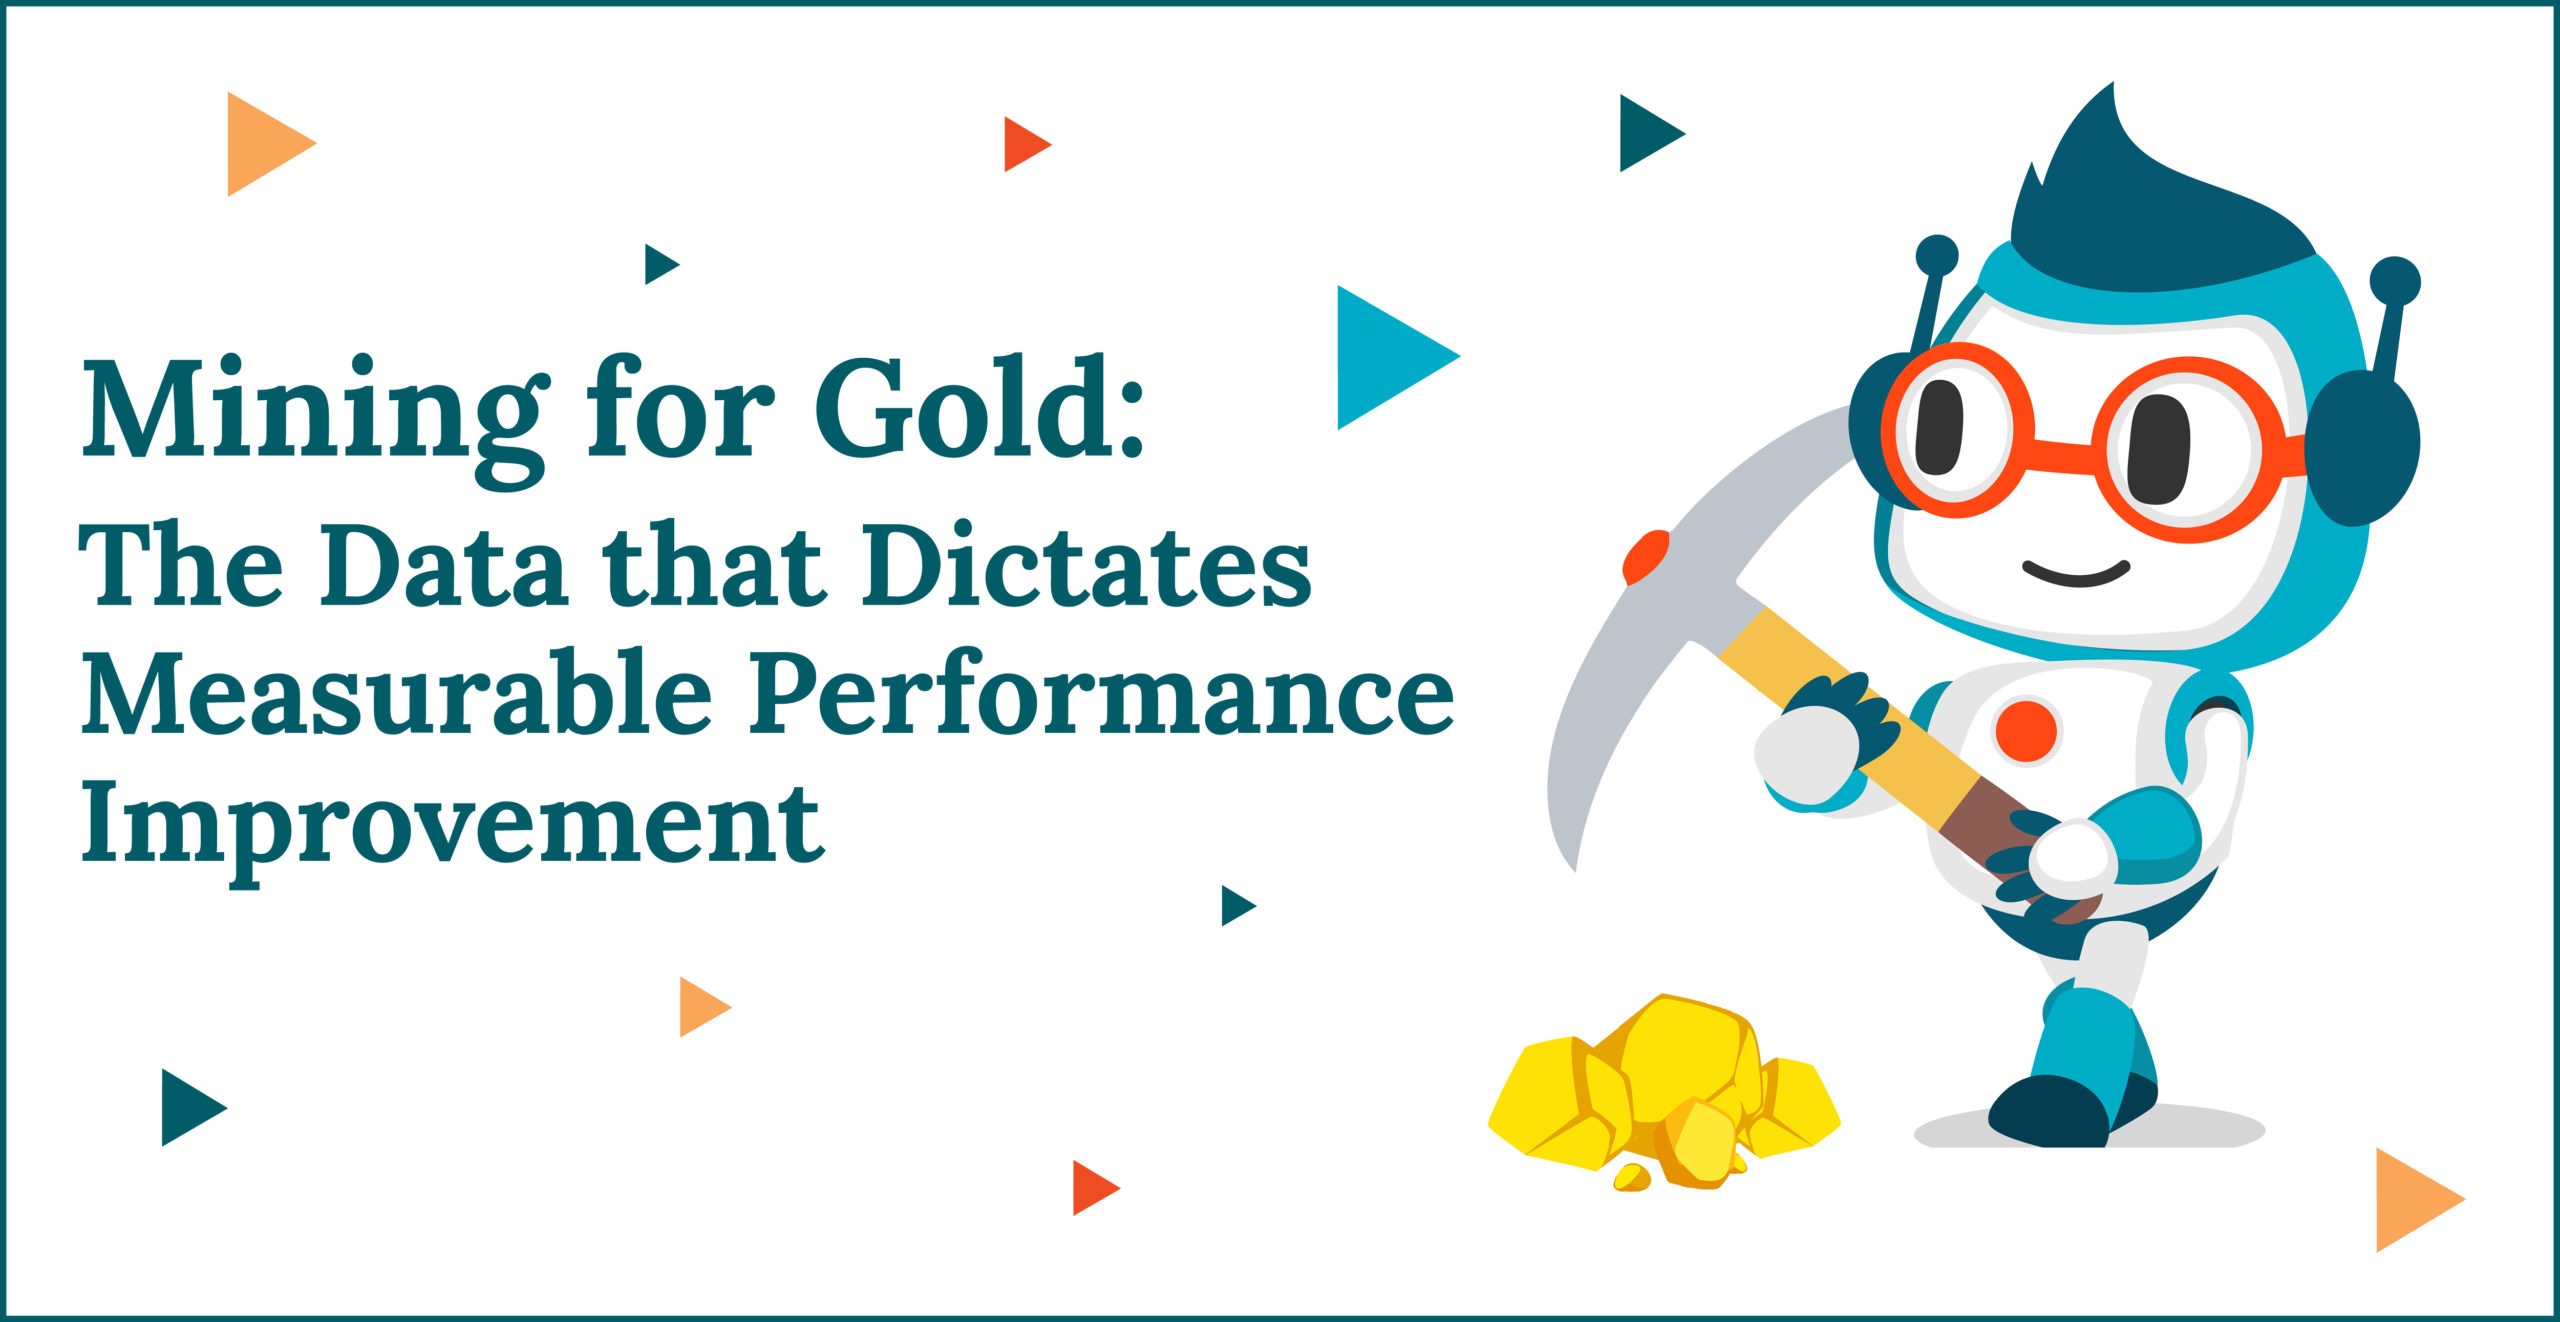 Mining for Gold: The Data that Dictates Measurable Performance Improvement